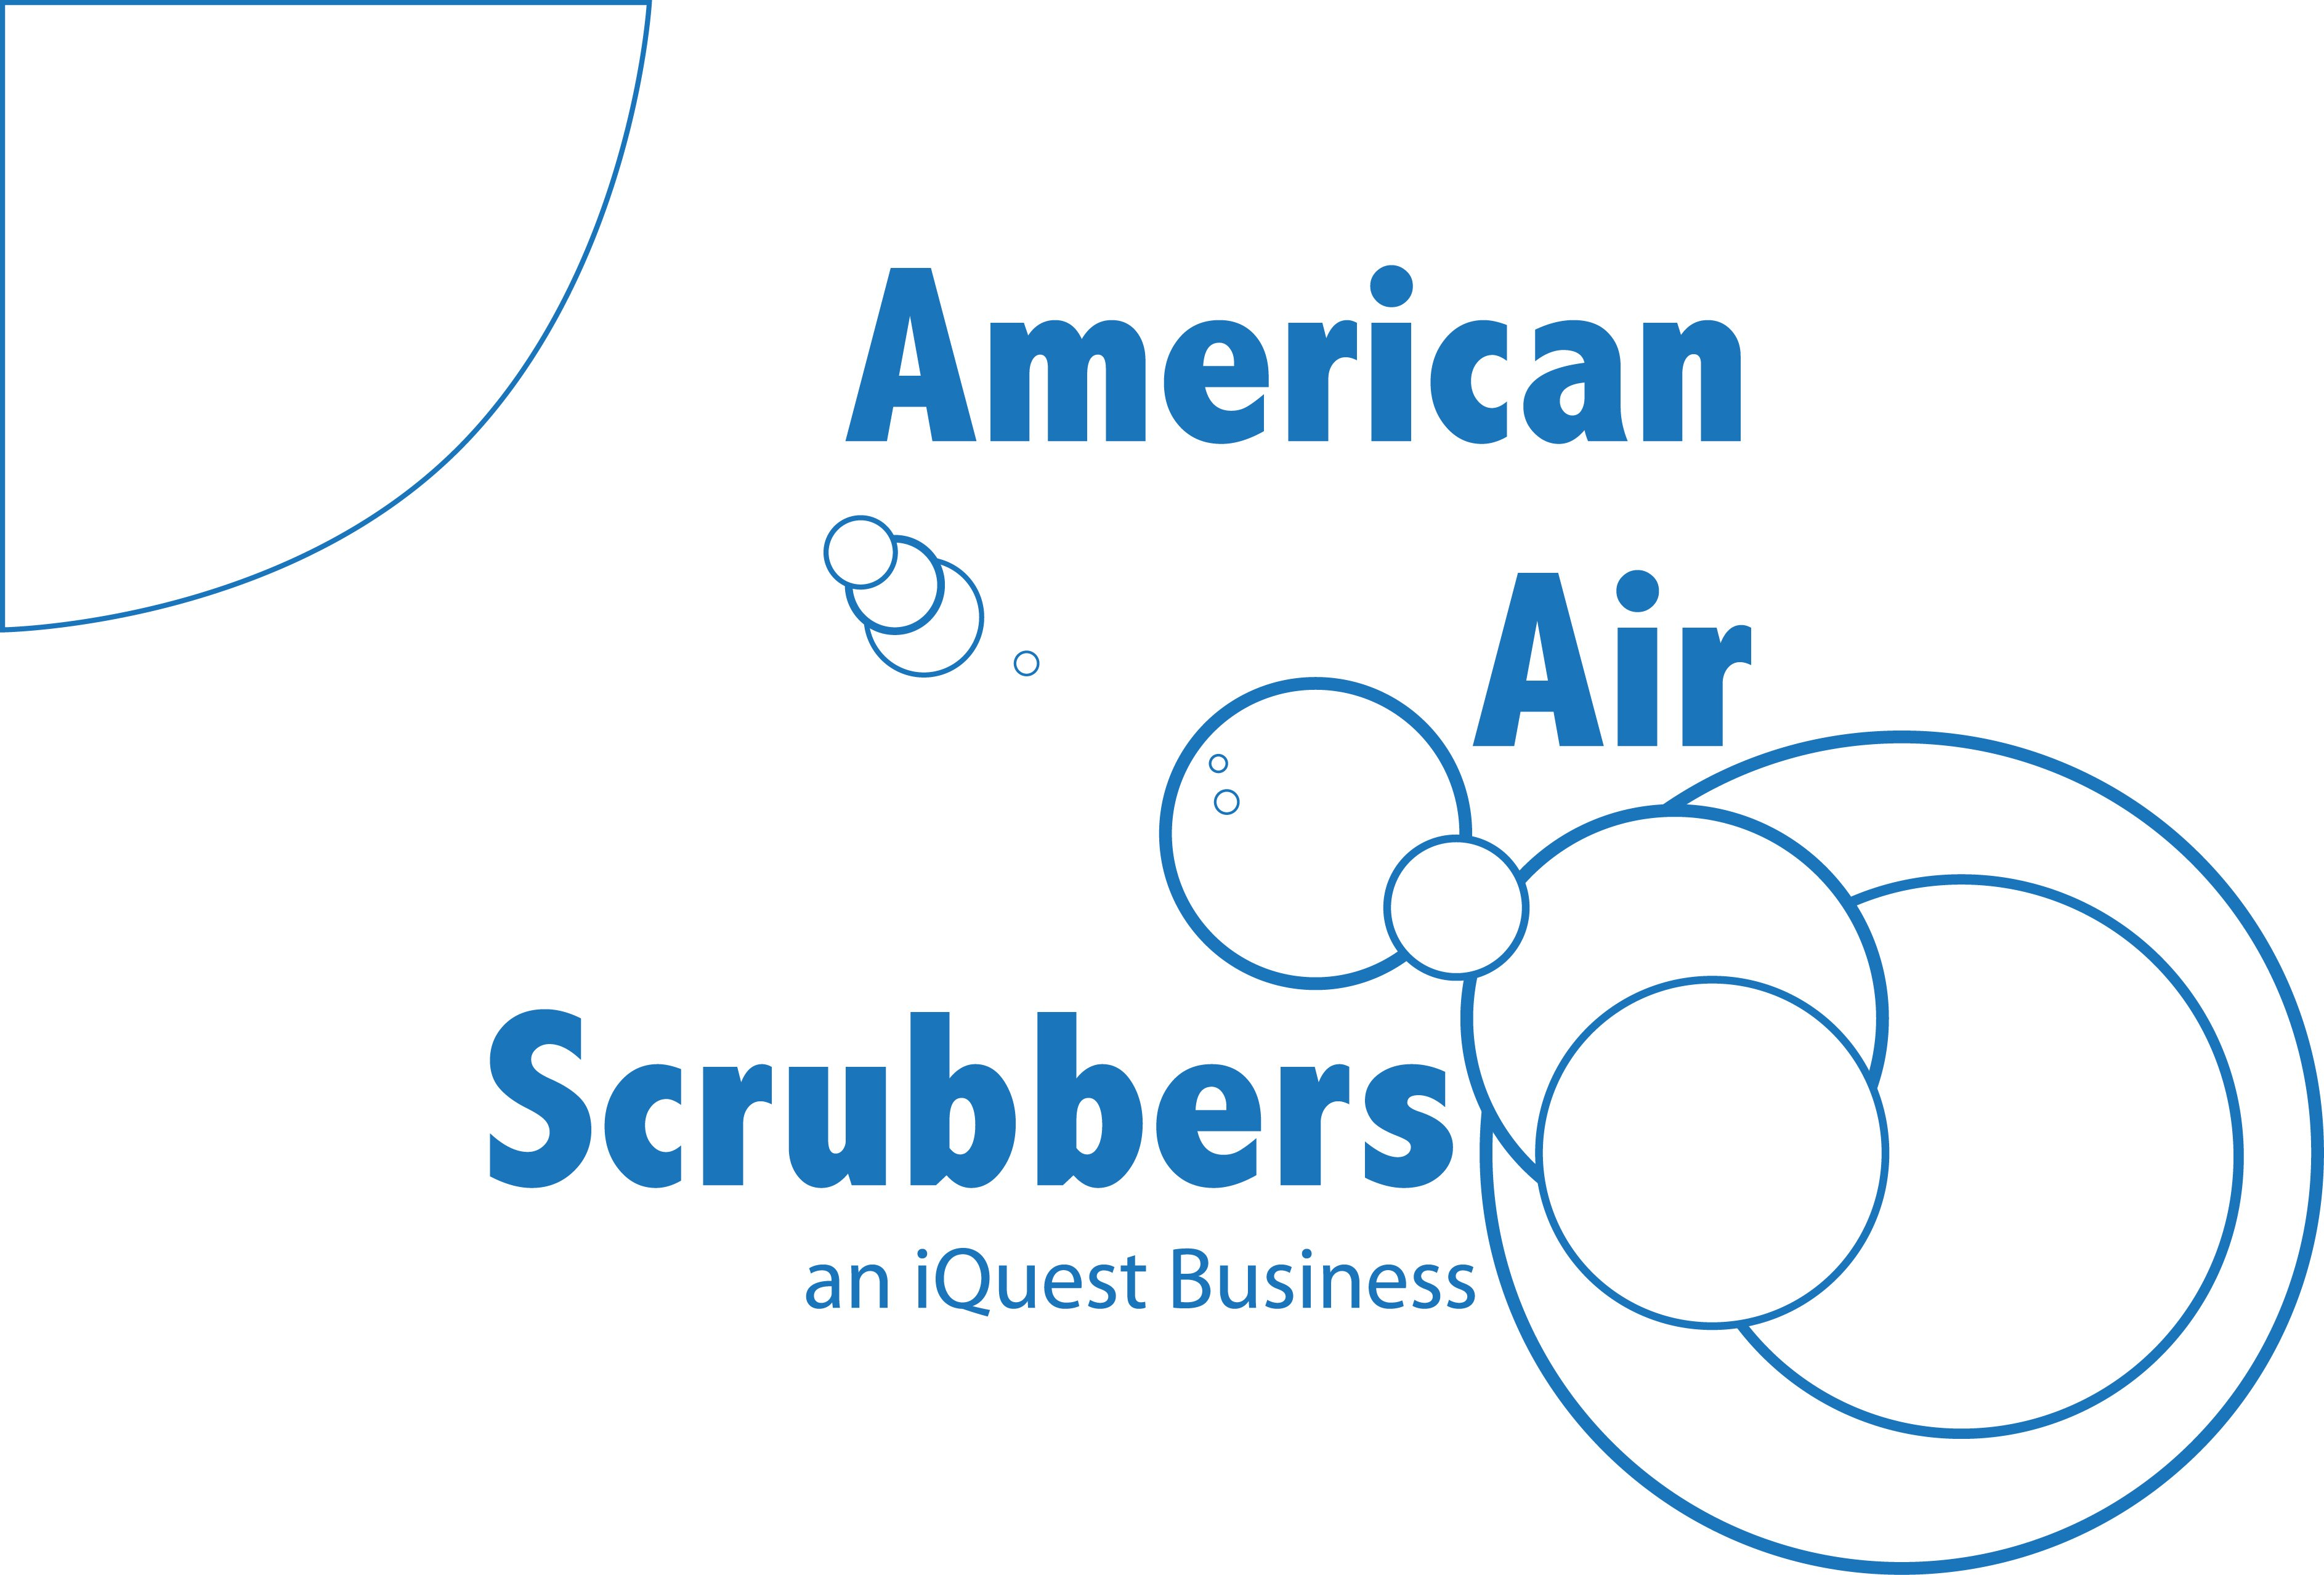  AMERICAN AIR SCRUBBERS AN I-QUEST BUSINESS